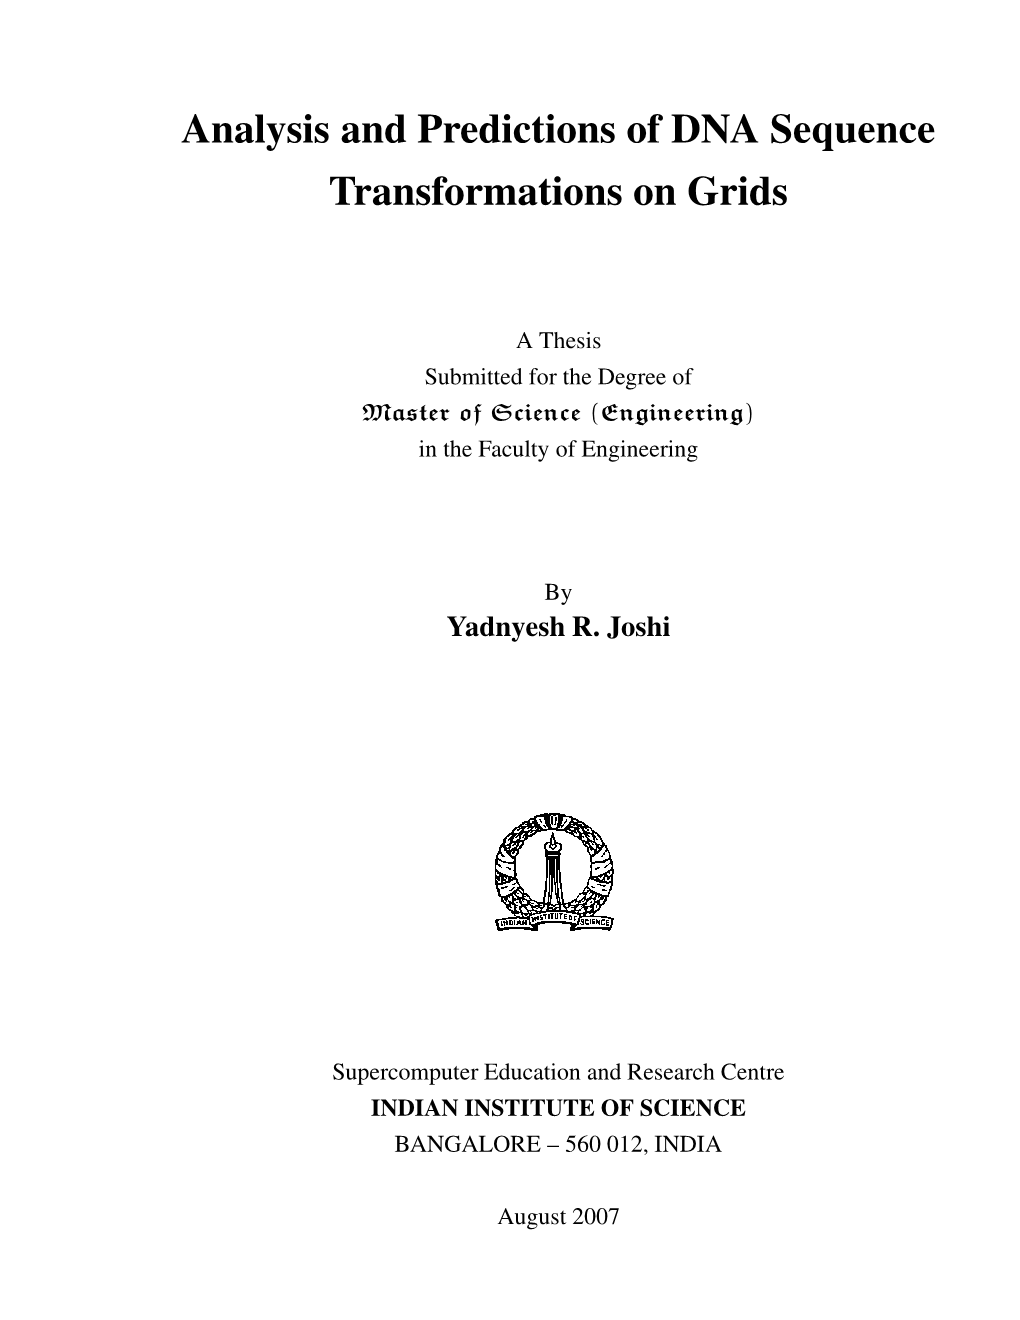 Analysis and Predictions of DNA Sequence Transformations on Grids